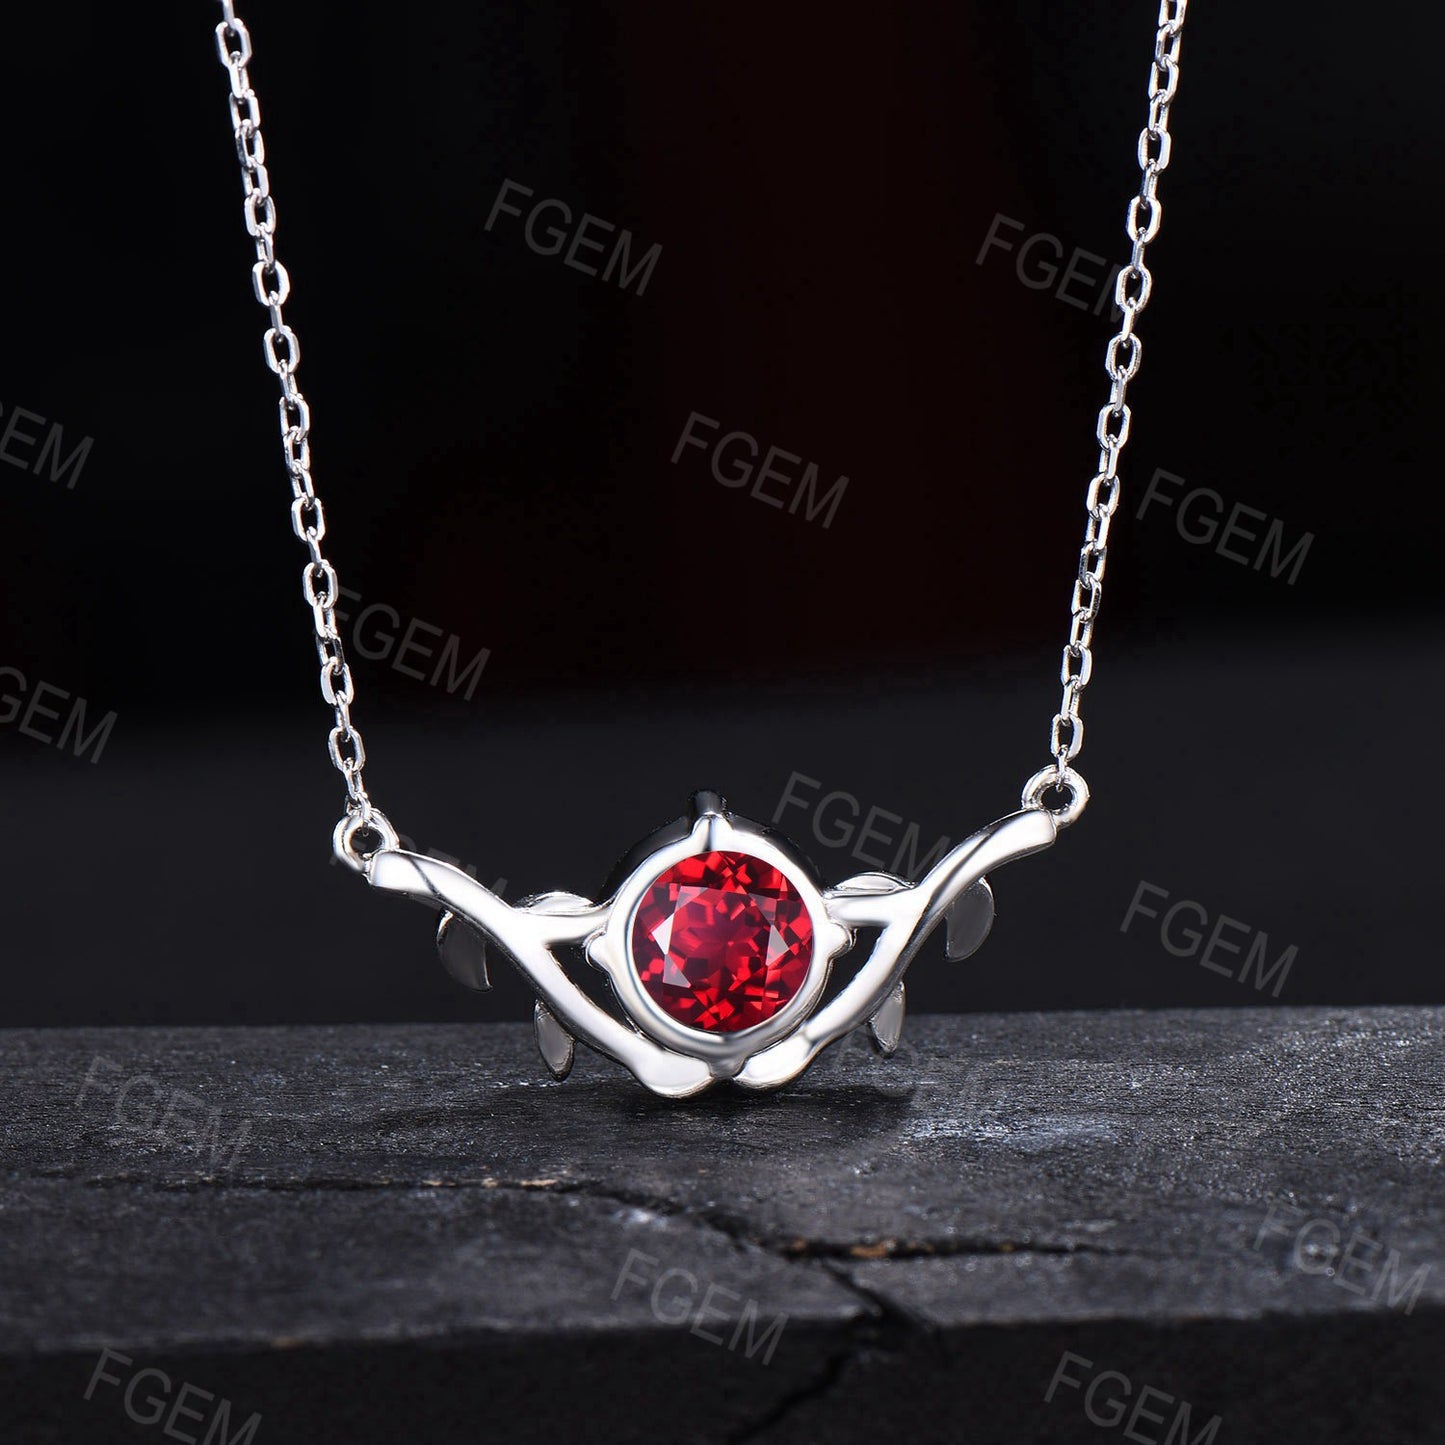 Nature Inspired Ruby Solitaire Necklace Leaf Band Ruby Pendant Twig leaf Vine July birthstone Jewelry 8mm Round Ruby Necklace Gifts For Her